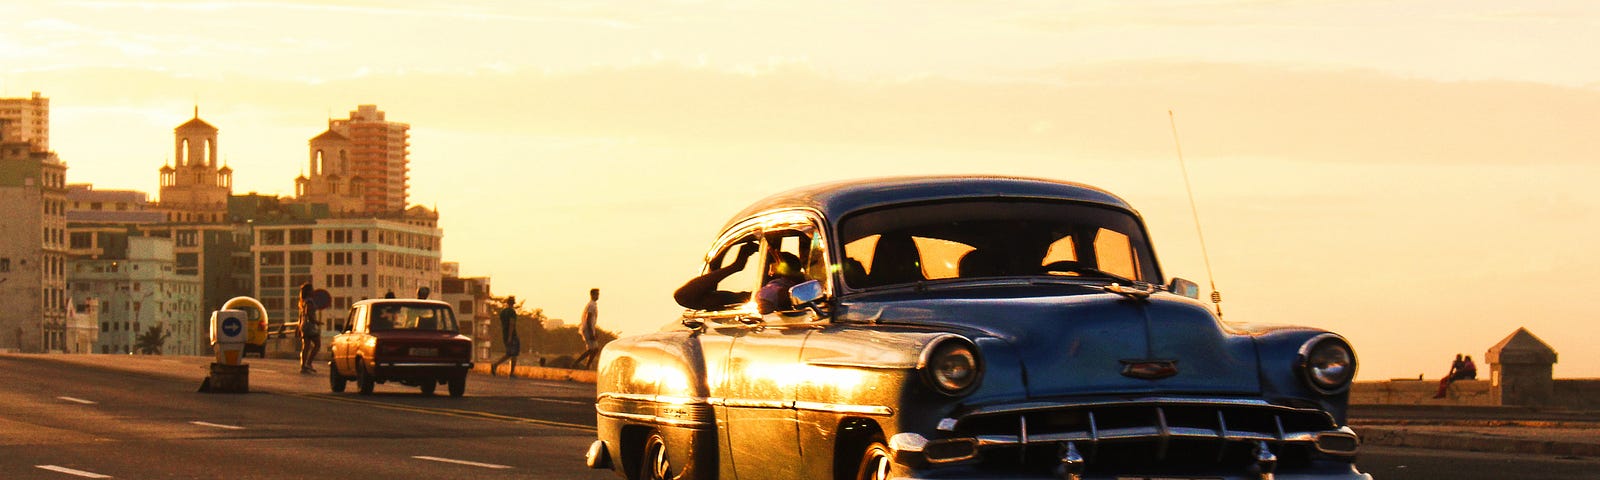 An old car driving at sunset in Cuba